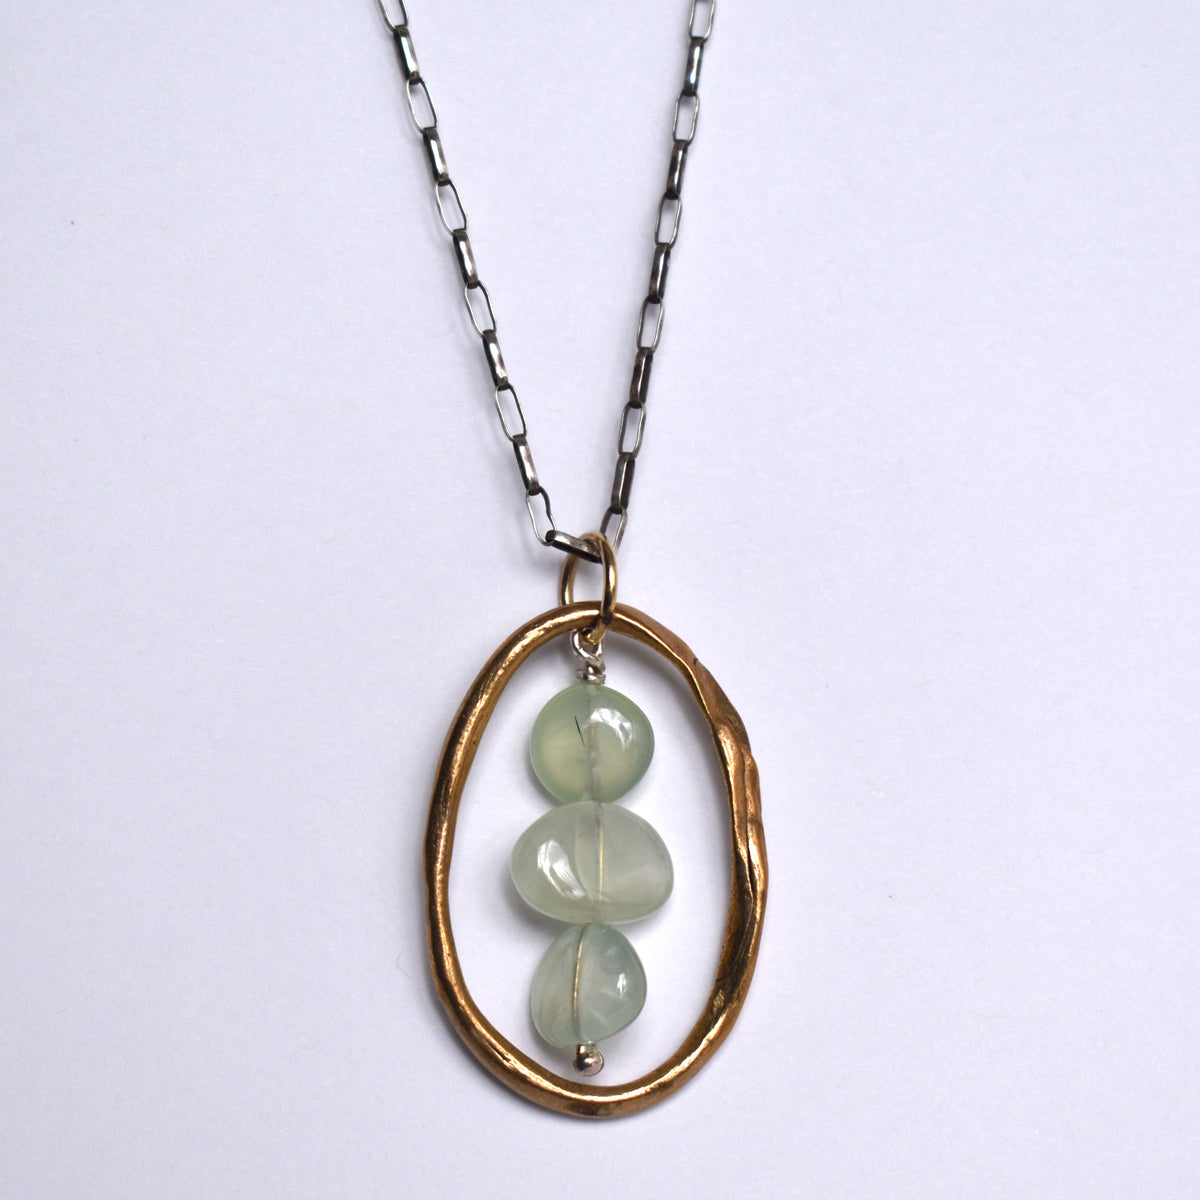 Handformed bronze oval with green agate necklace